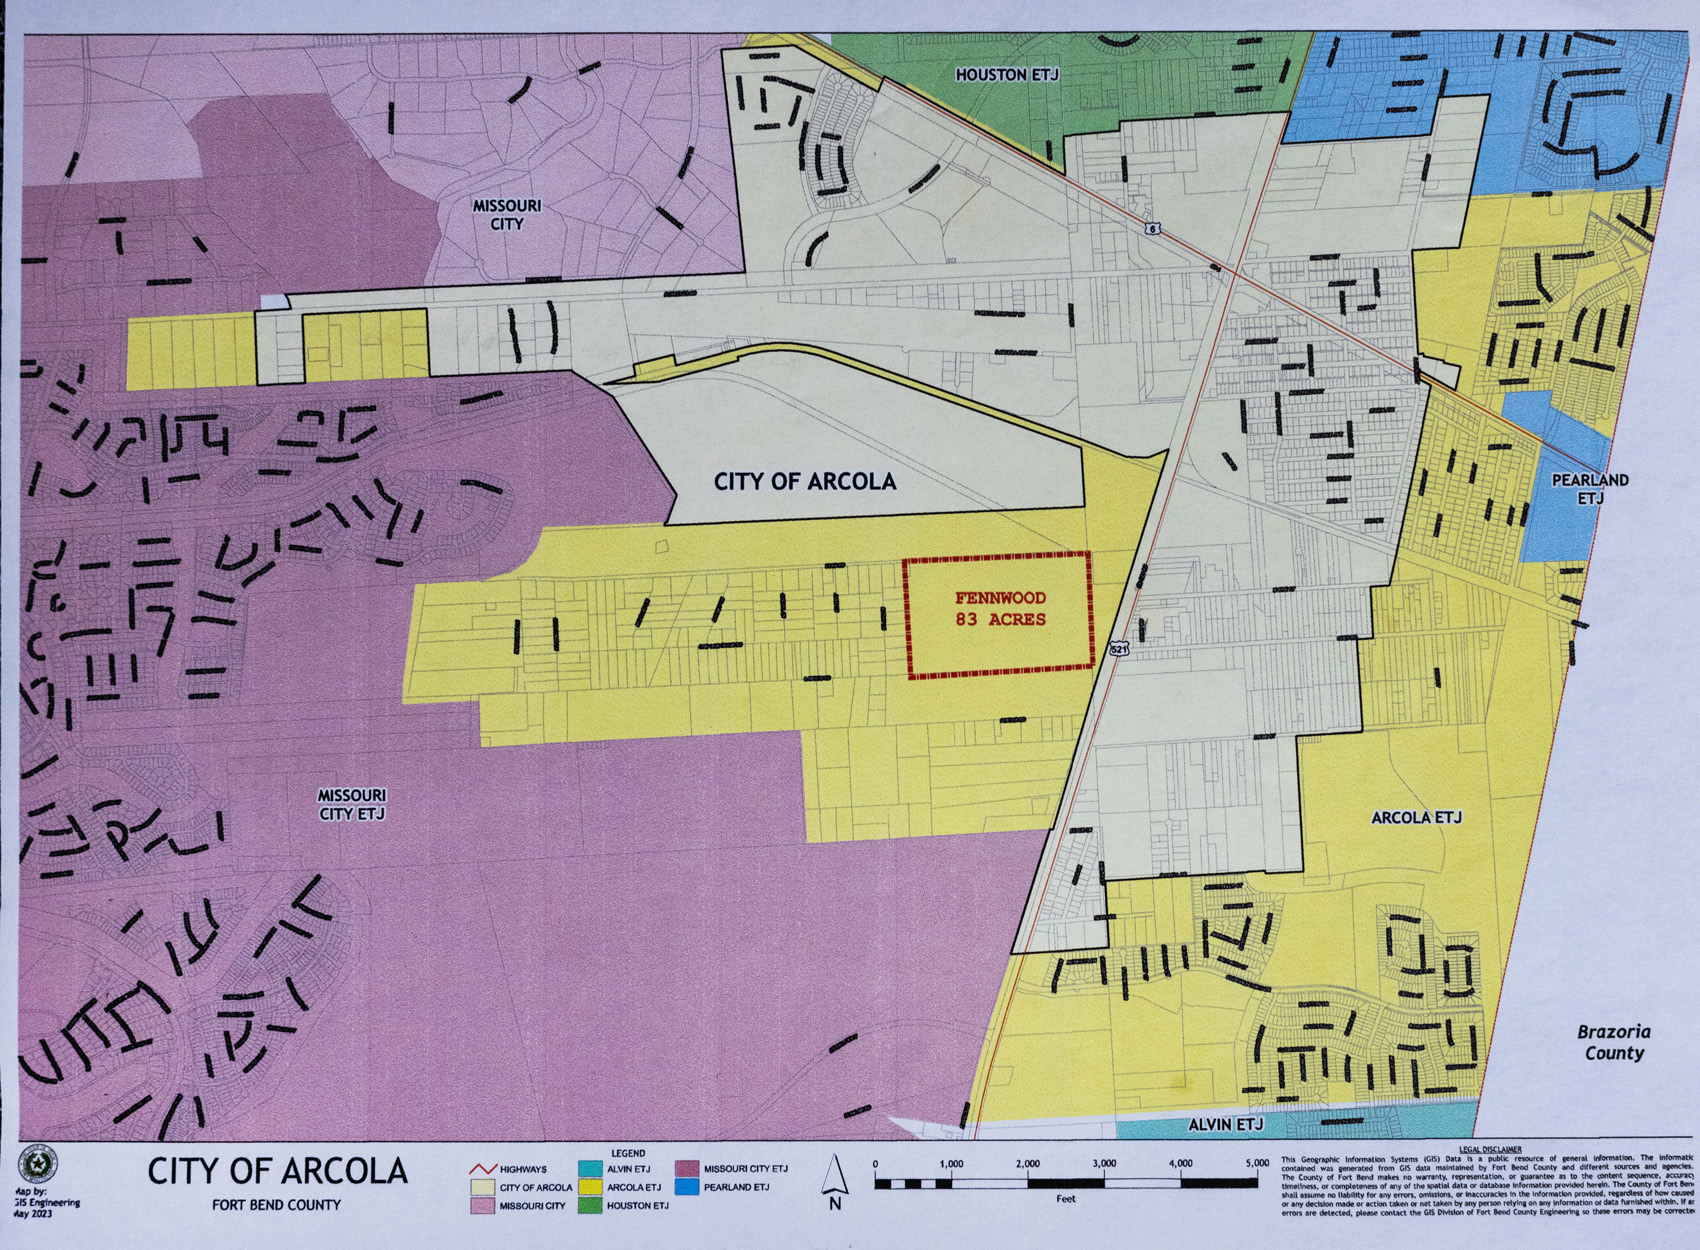 Map of the City of Arcola's jurisdiction limits.